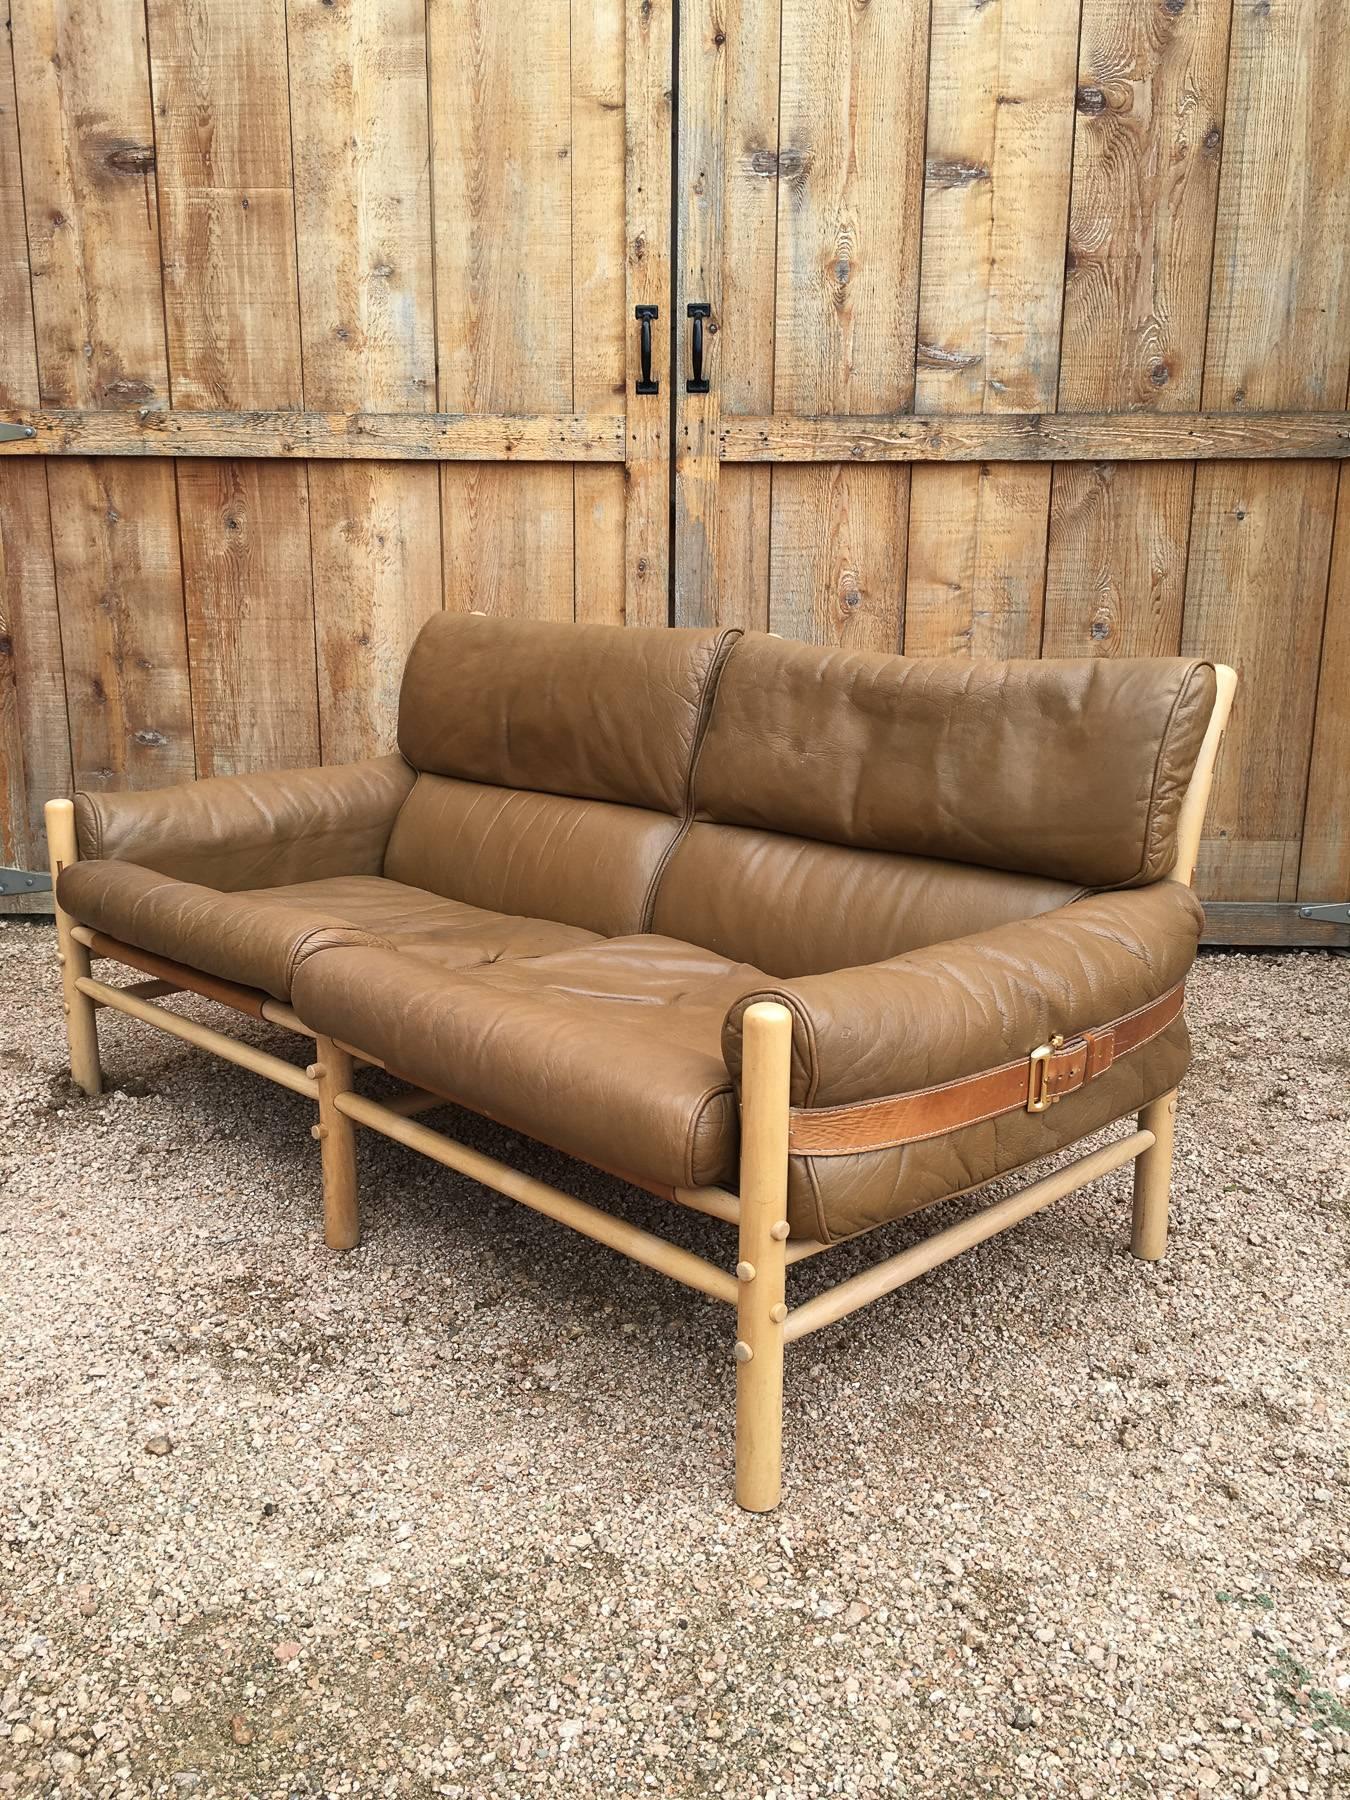 Sofa model Kontiki designed by Arne Norell. Produced by Arne Norell AB in Aneby, Sweden.